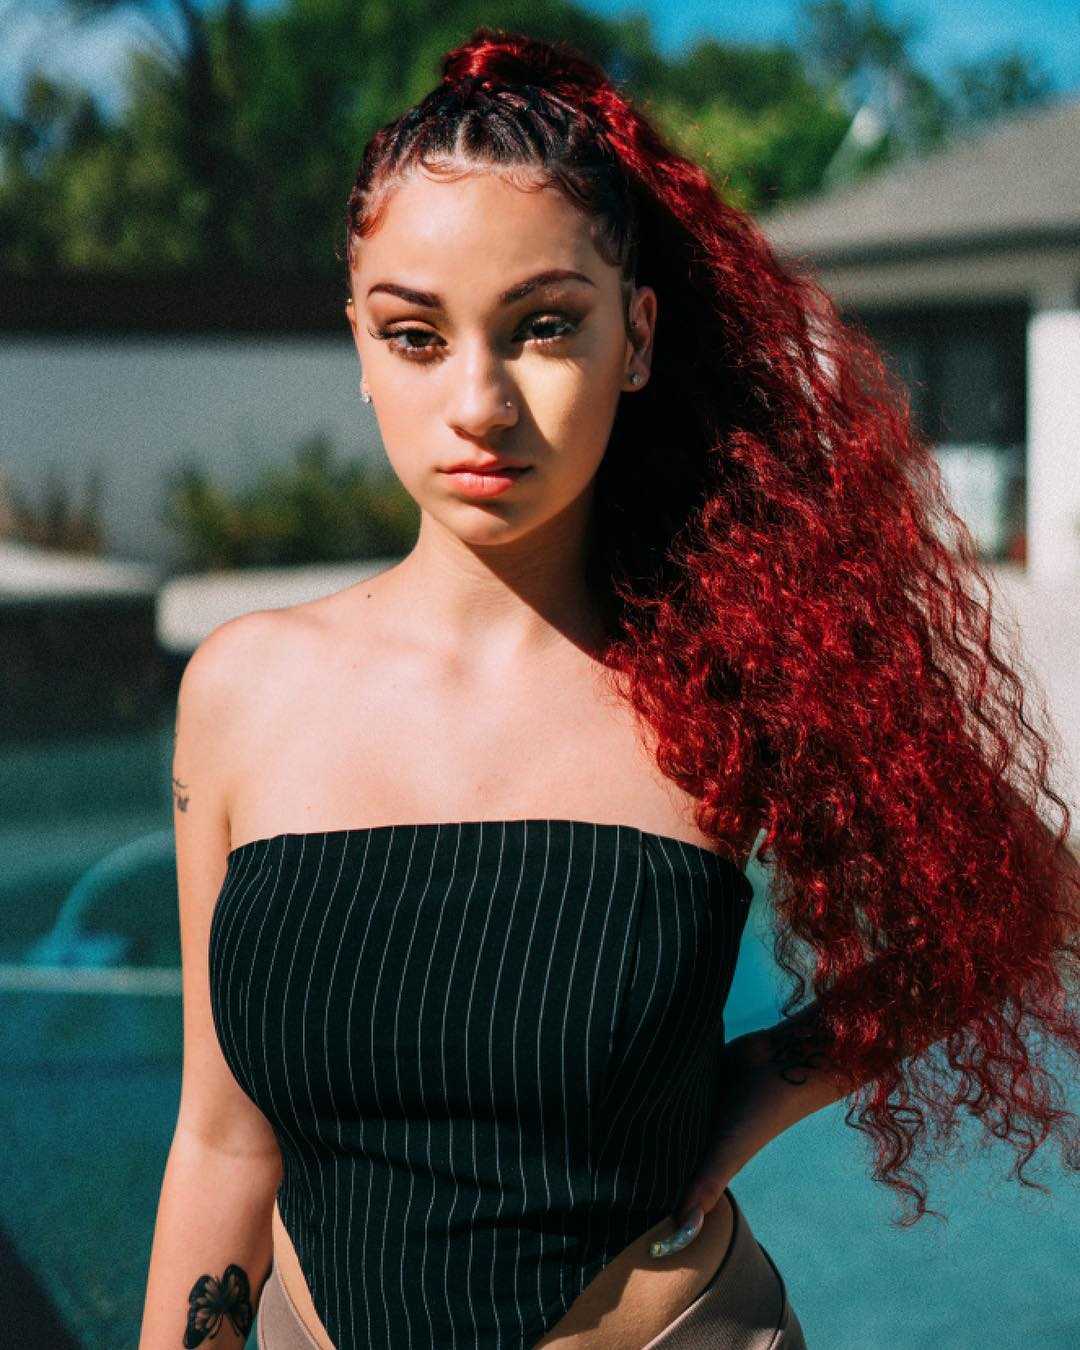 70+ Hot Pictures Of Danielle Bregoli aka Bhad Bhabie Which Will Win Your Heart 271